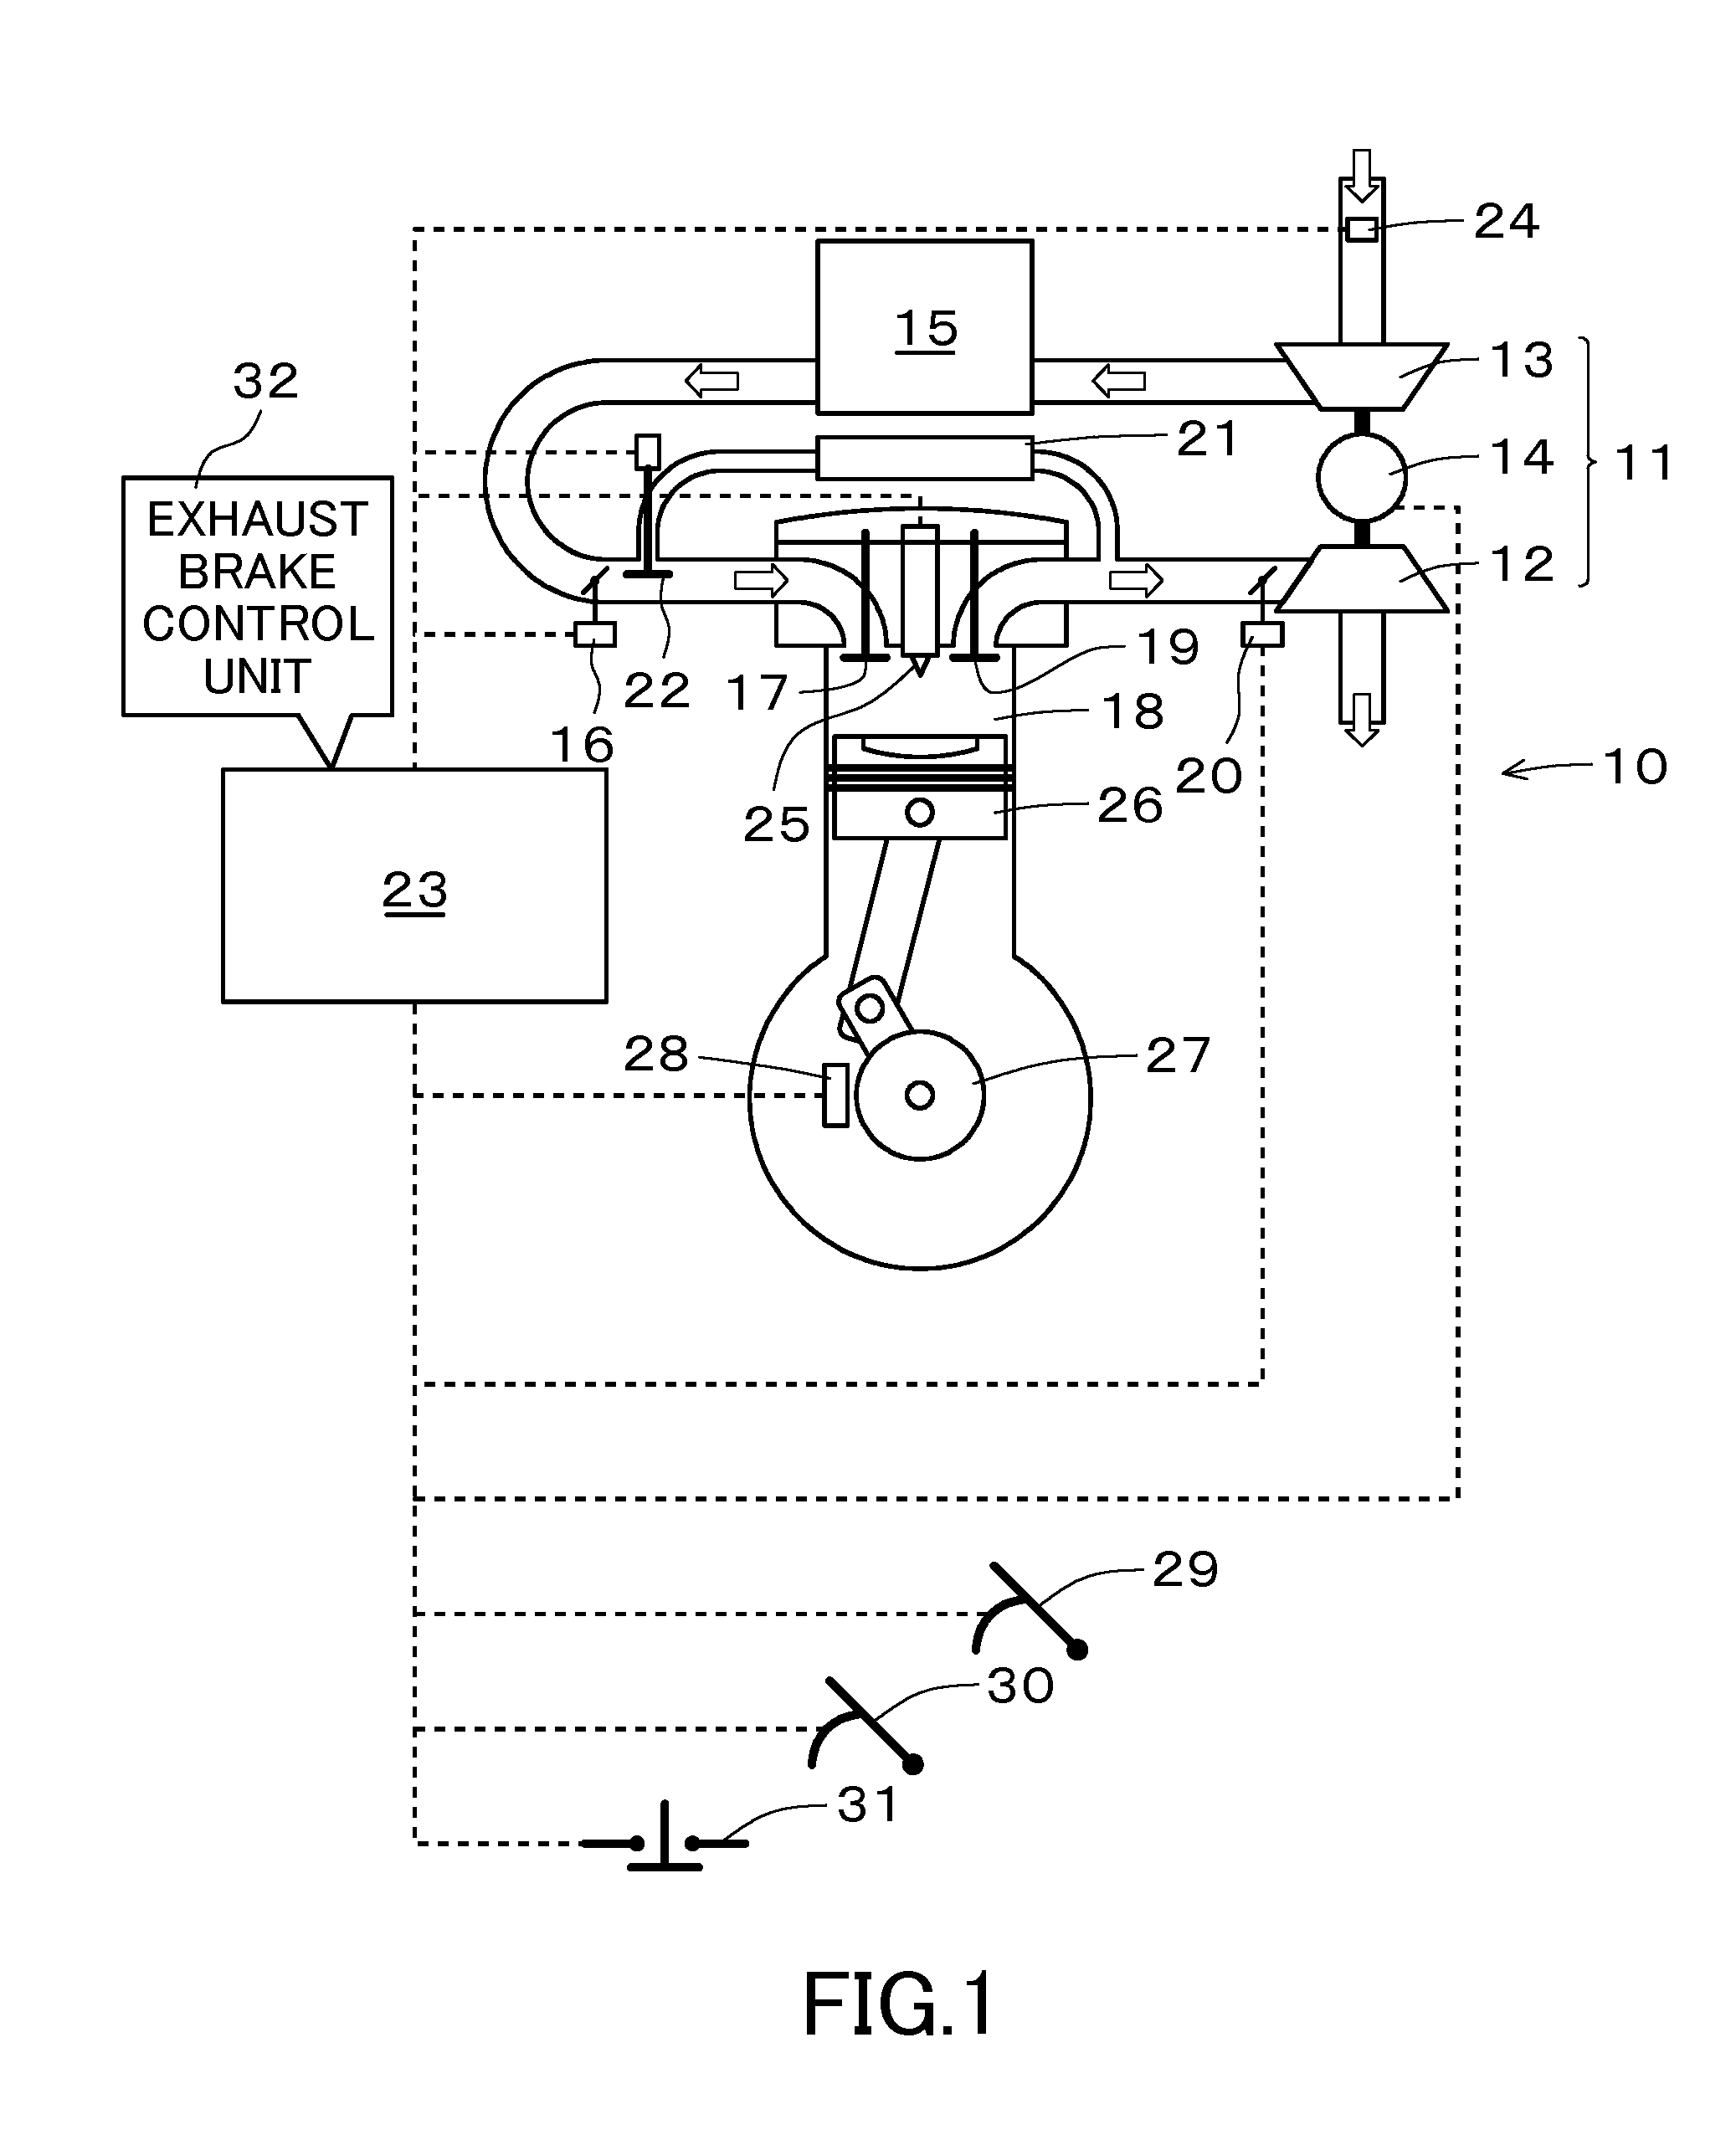 Internal combustion engine exhaust brake control method and device